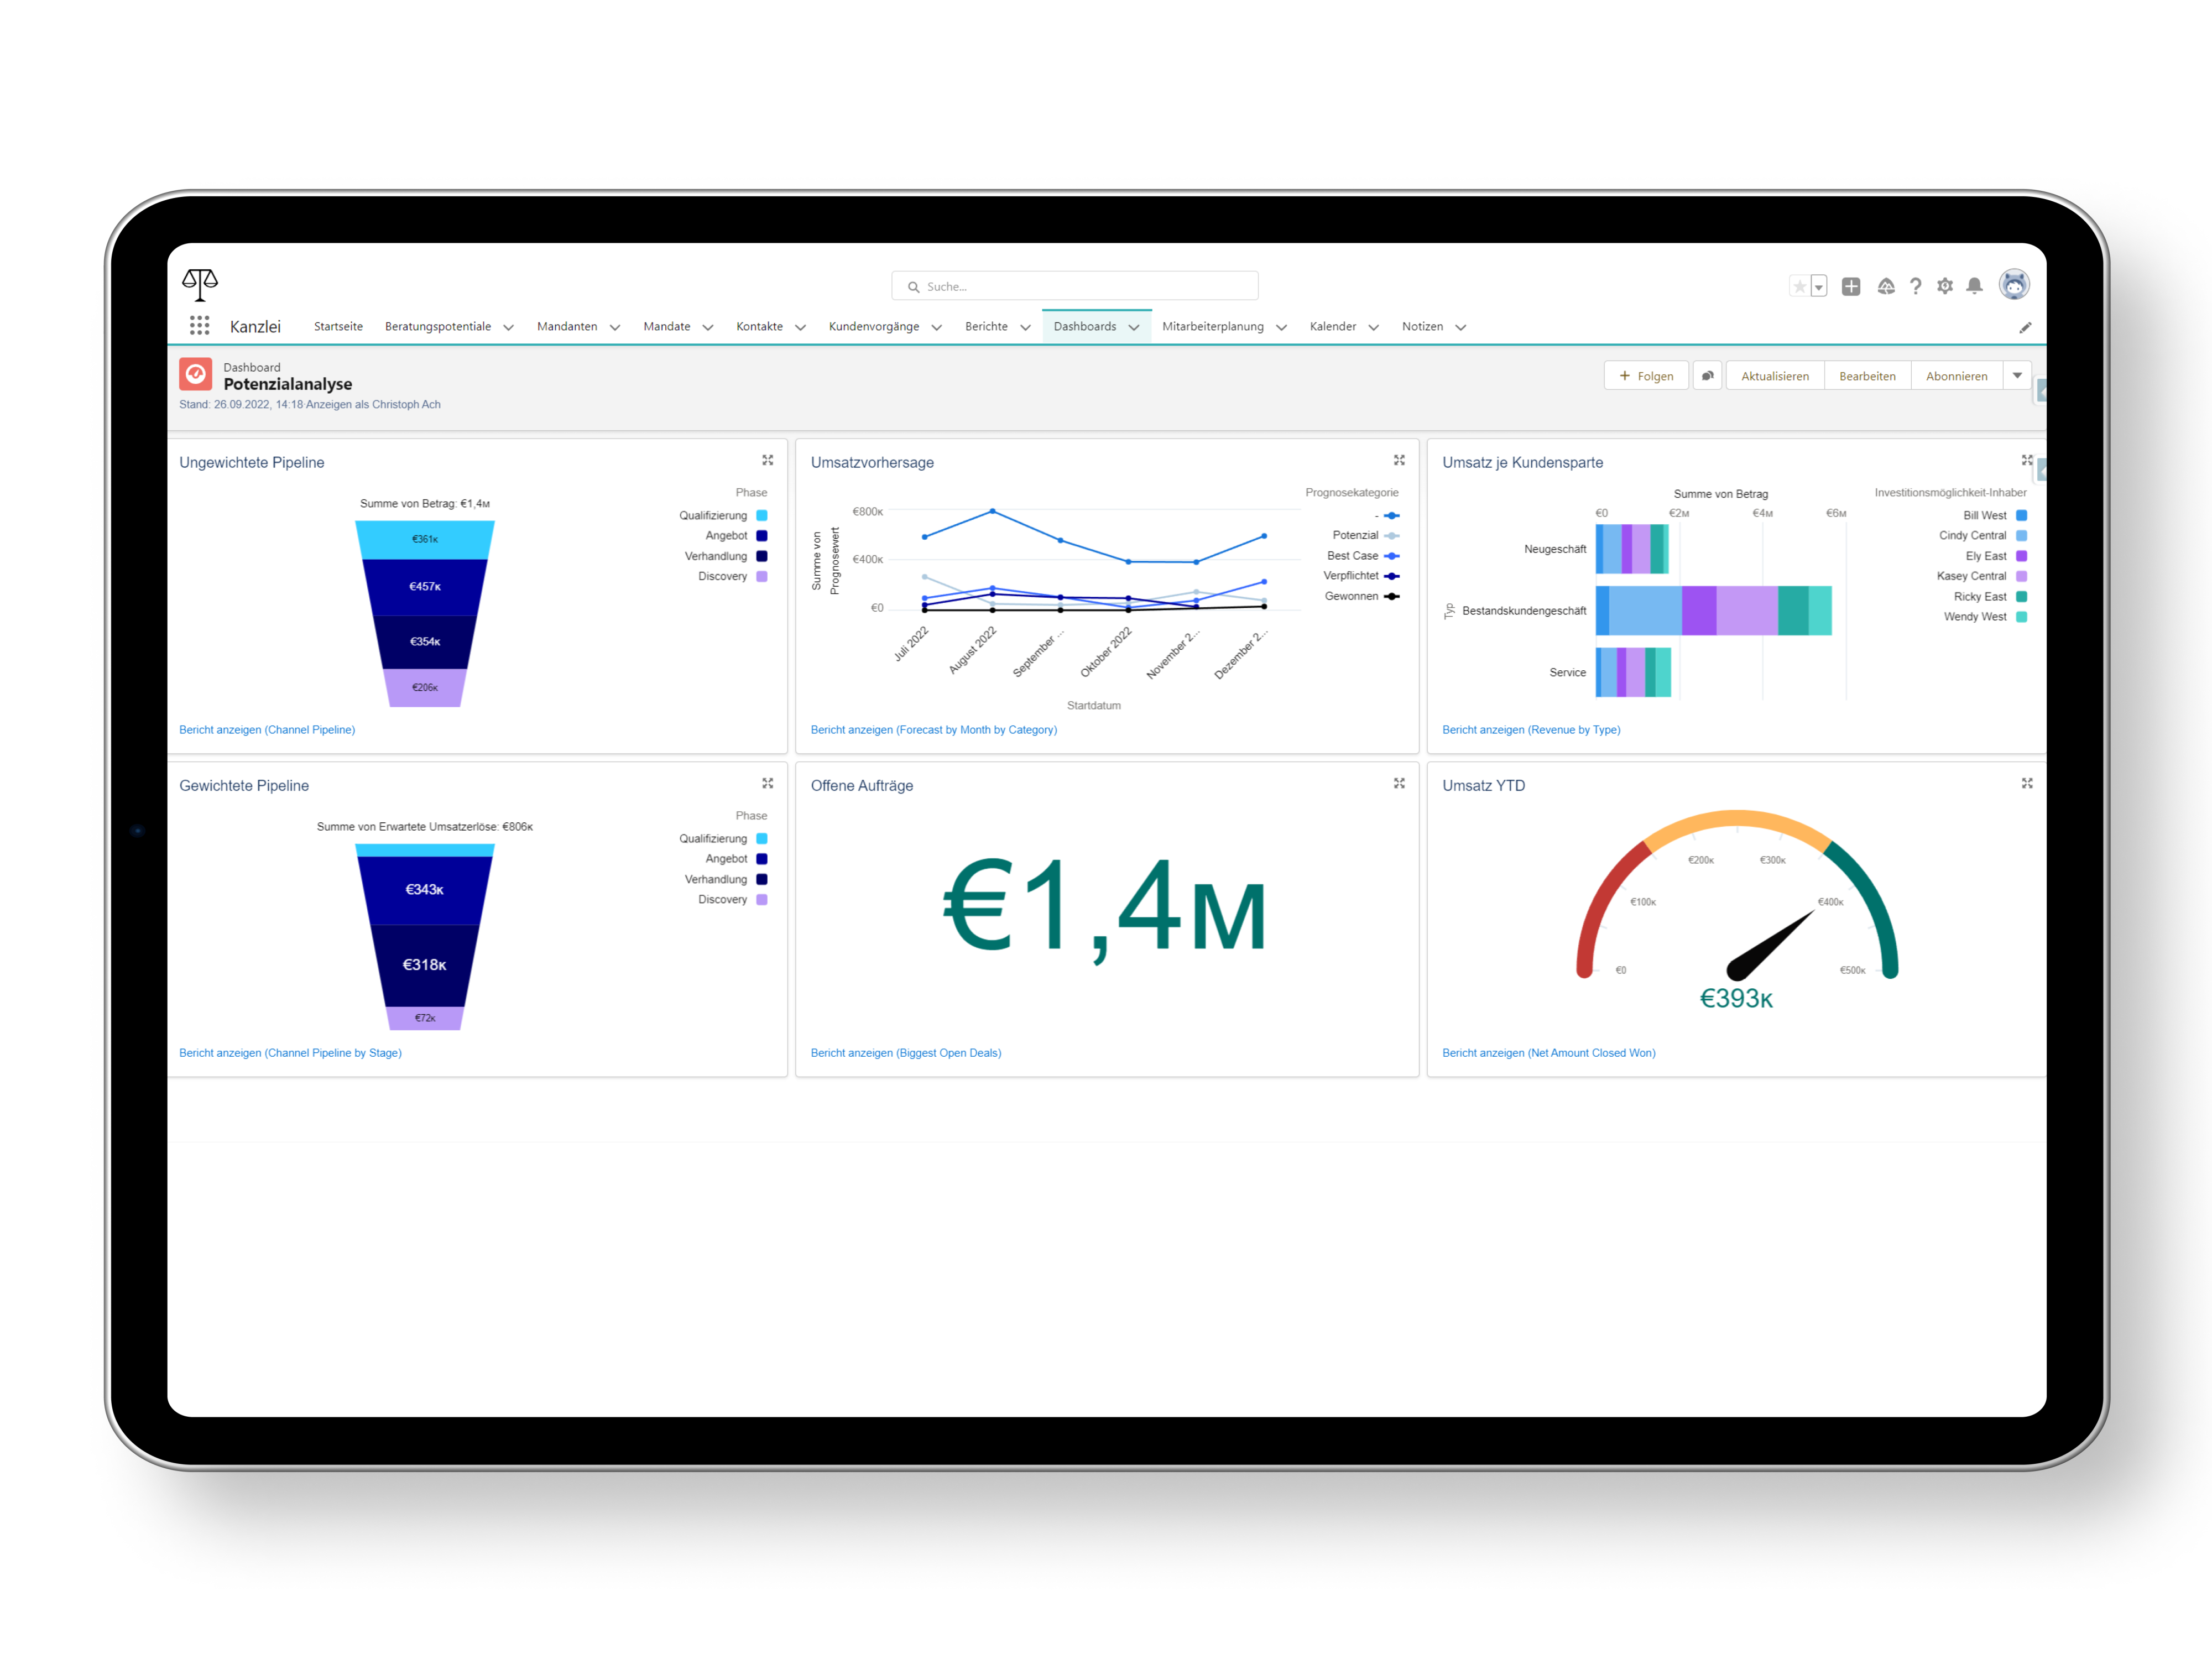 Screenshot of a Salesforce dashboard. With the help of various KPIs and visualizations, the sales potential can be viewed and analyzed holistically.